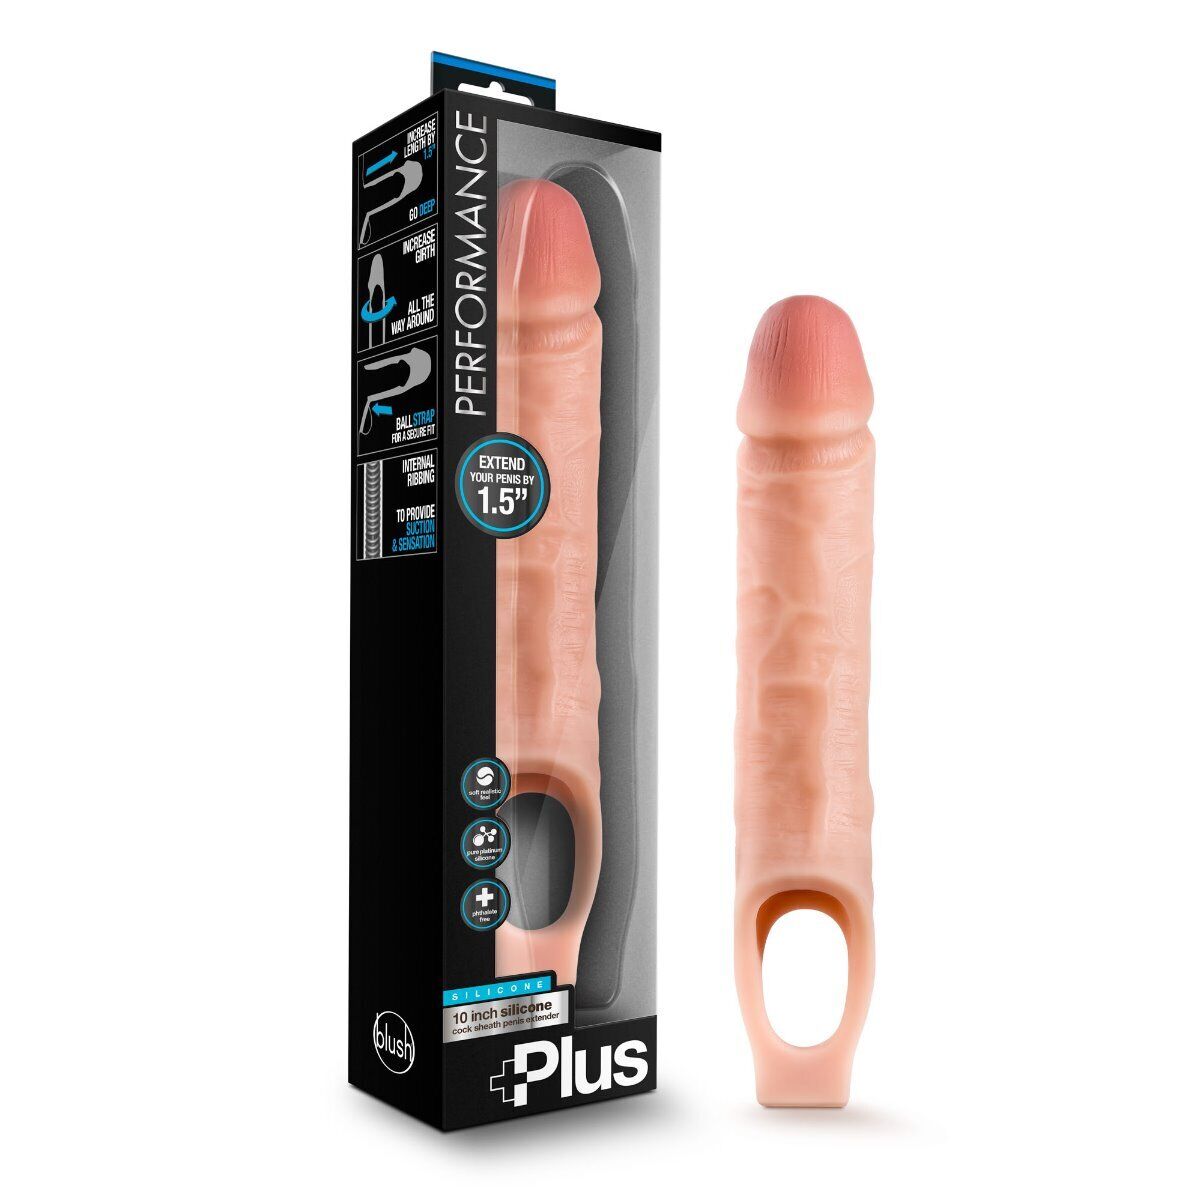 10" Silicone Cock Sheath Male Penis Extension Extender Girth Enhancer Enlarger